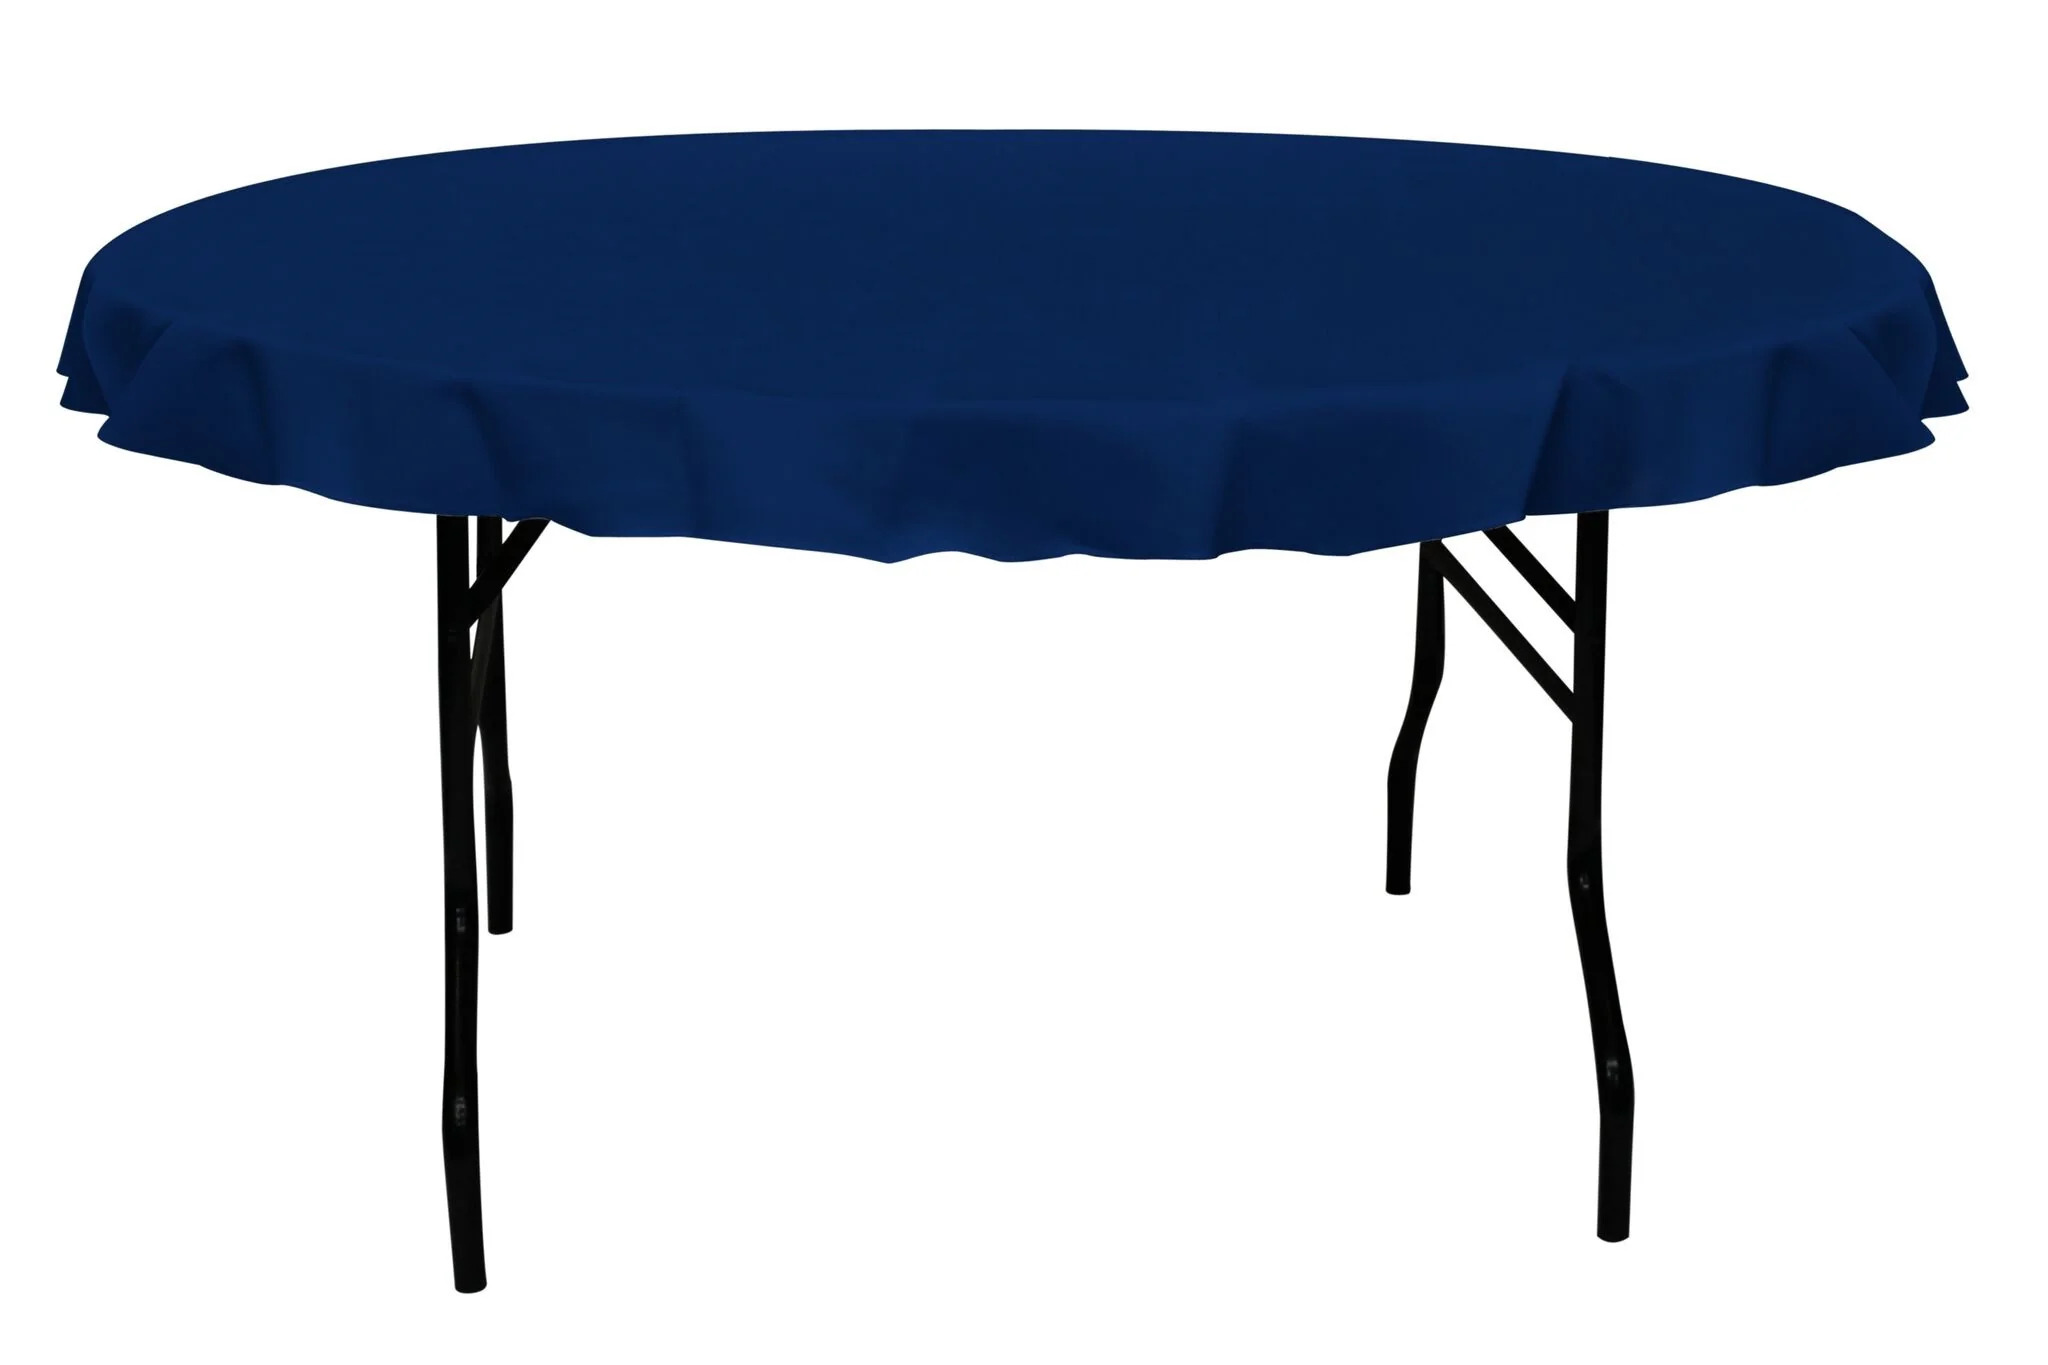 What Table Size Fits A 70-Inch Tablecloth?